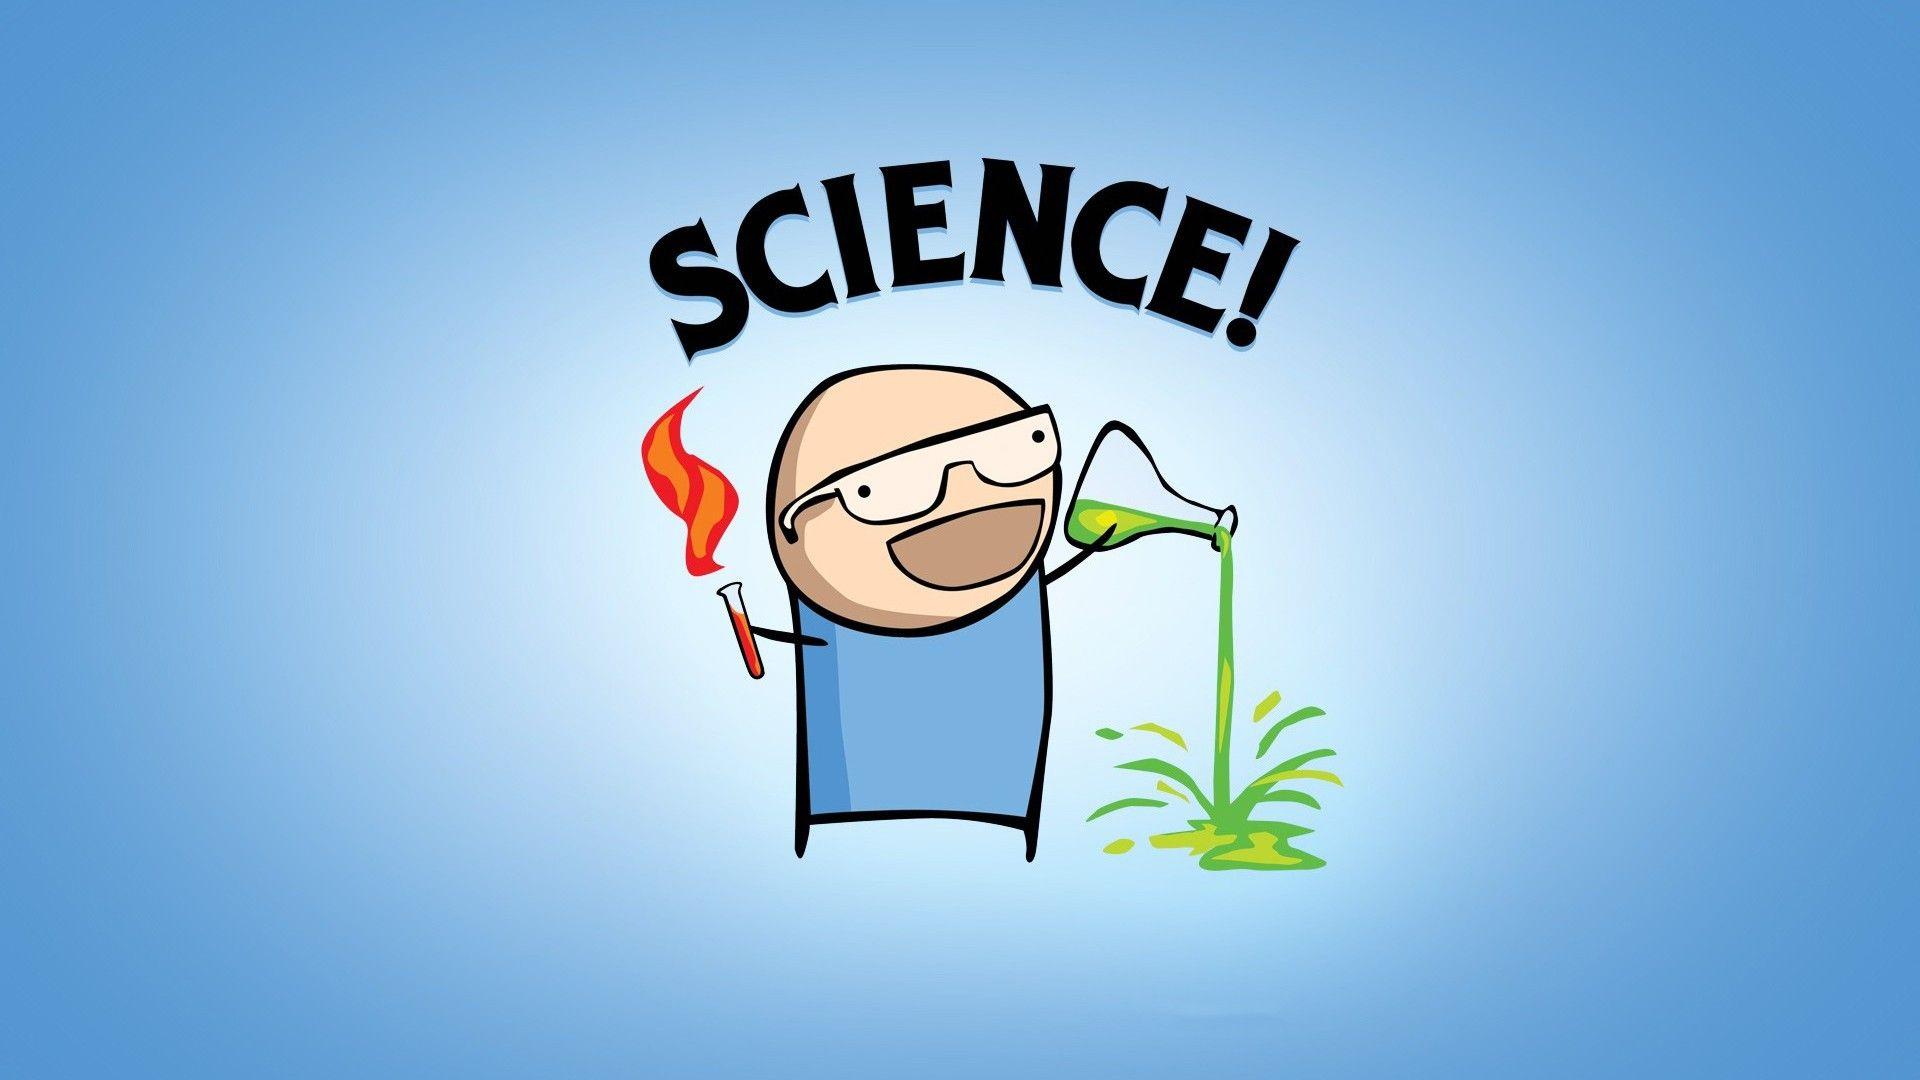 Pix For Science Wallpaper Backgrounds.